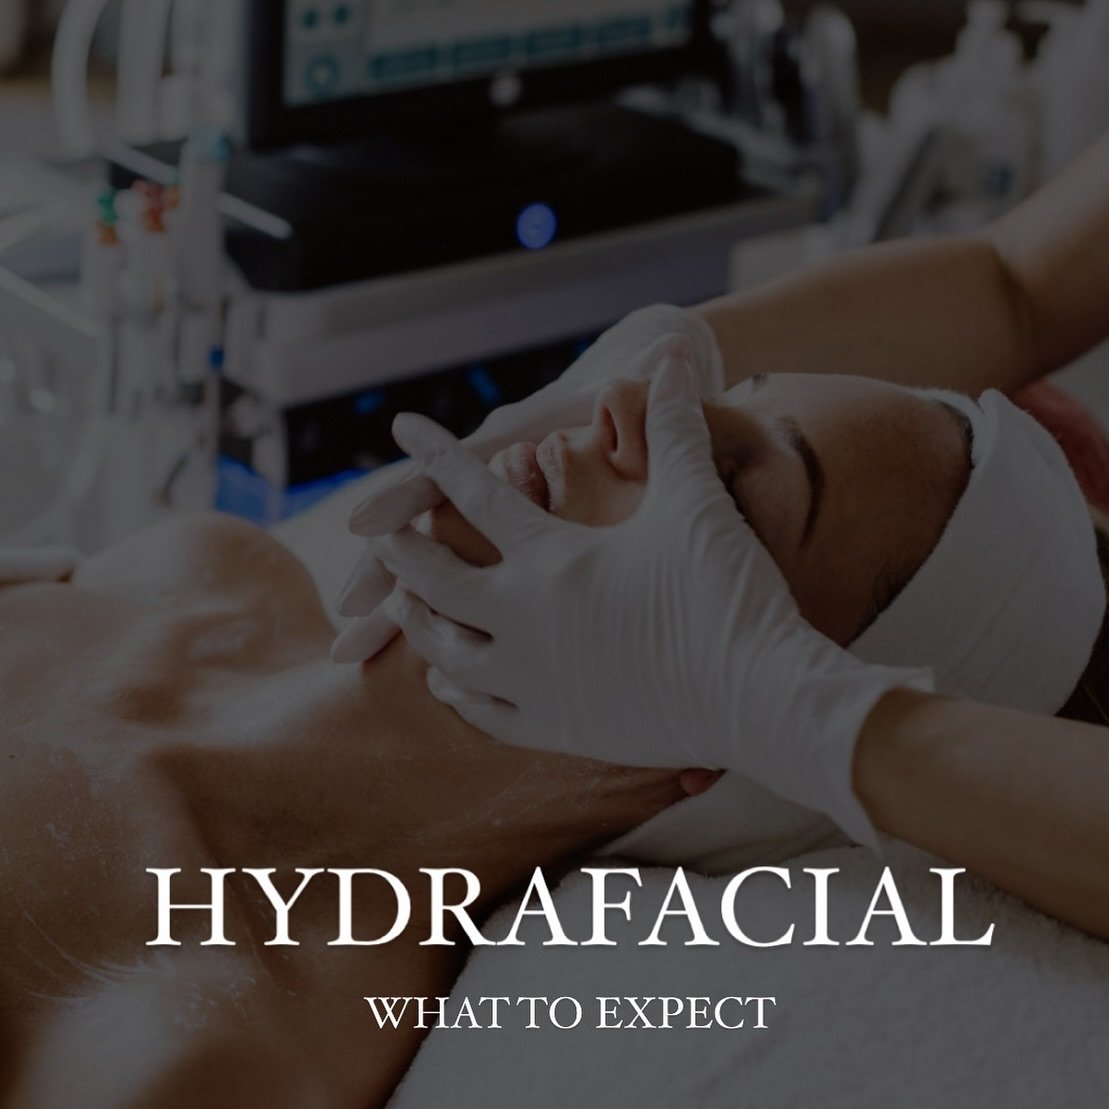 What to expect ⬇️ 

💧WE CONSULT WITH YOU BEFORE BEGINNING THE TREATMENT TO HEAR WHAT AREAS YOU WANT TO TARGET DURING YOUR FACIAL. WE THEN CHOOSE THE RIGHT HYDRAFACIAL BOOSTER TO TARGET THOSE CONCERNS.

💧WE START WITH CLEANSING THE SKIN.

💧THEN, MO